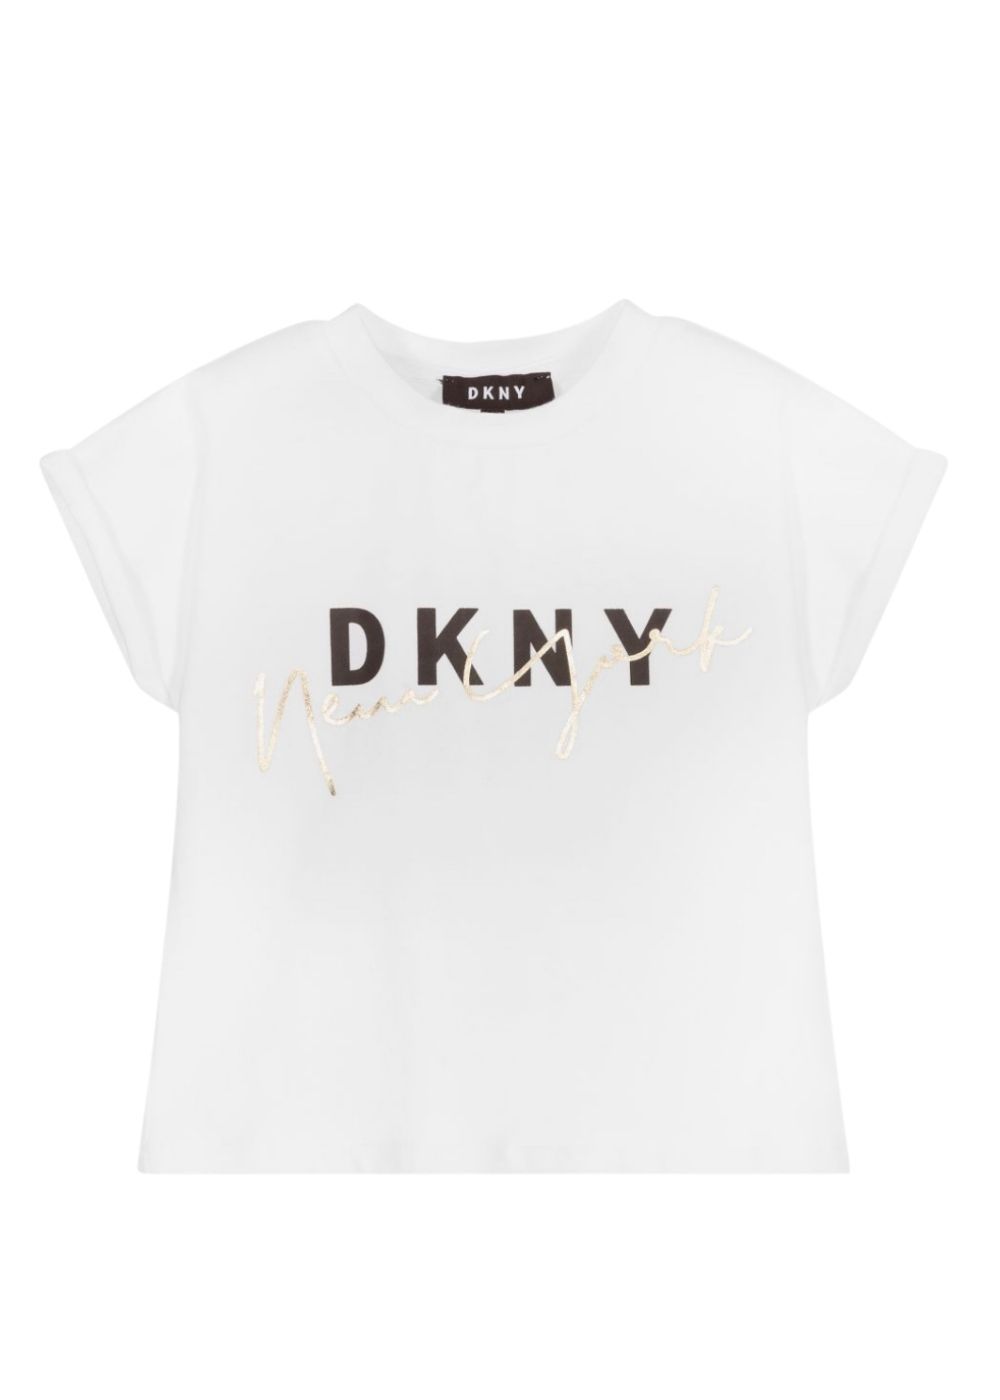 Featured image for “Dkny T-shirt con stampa”